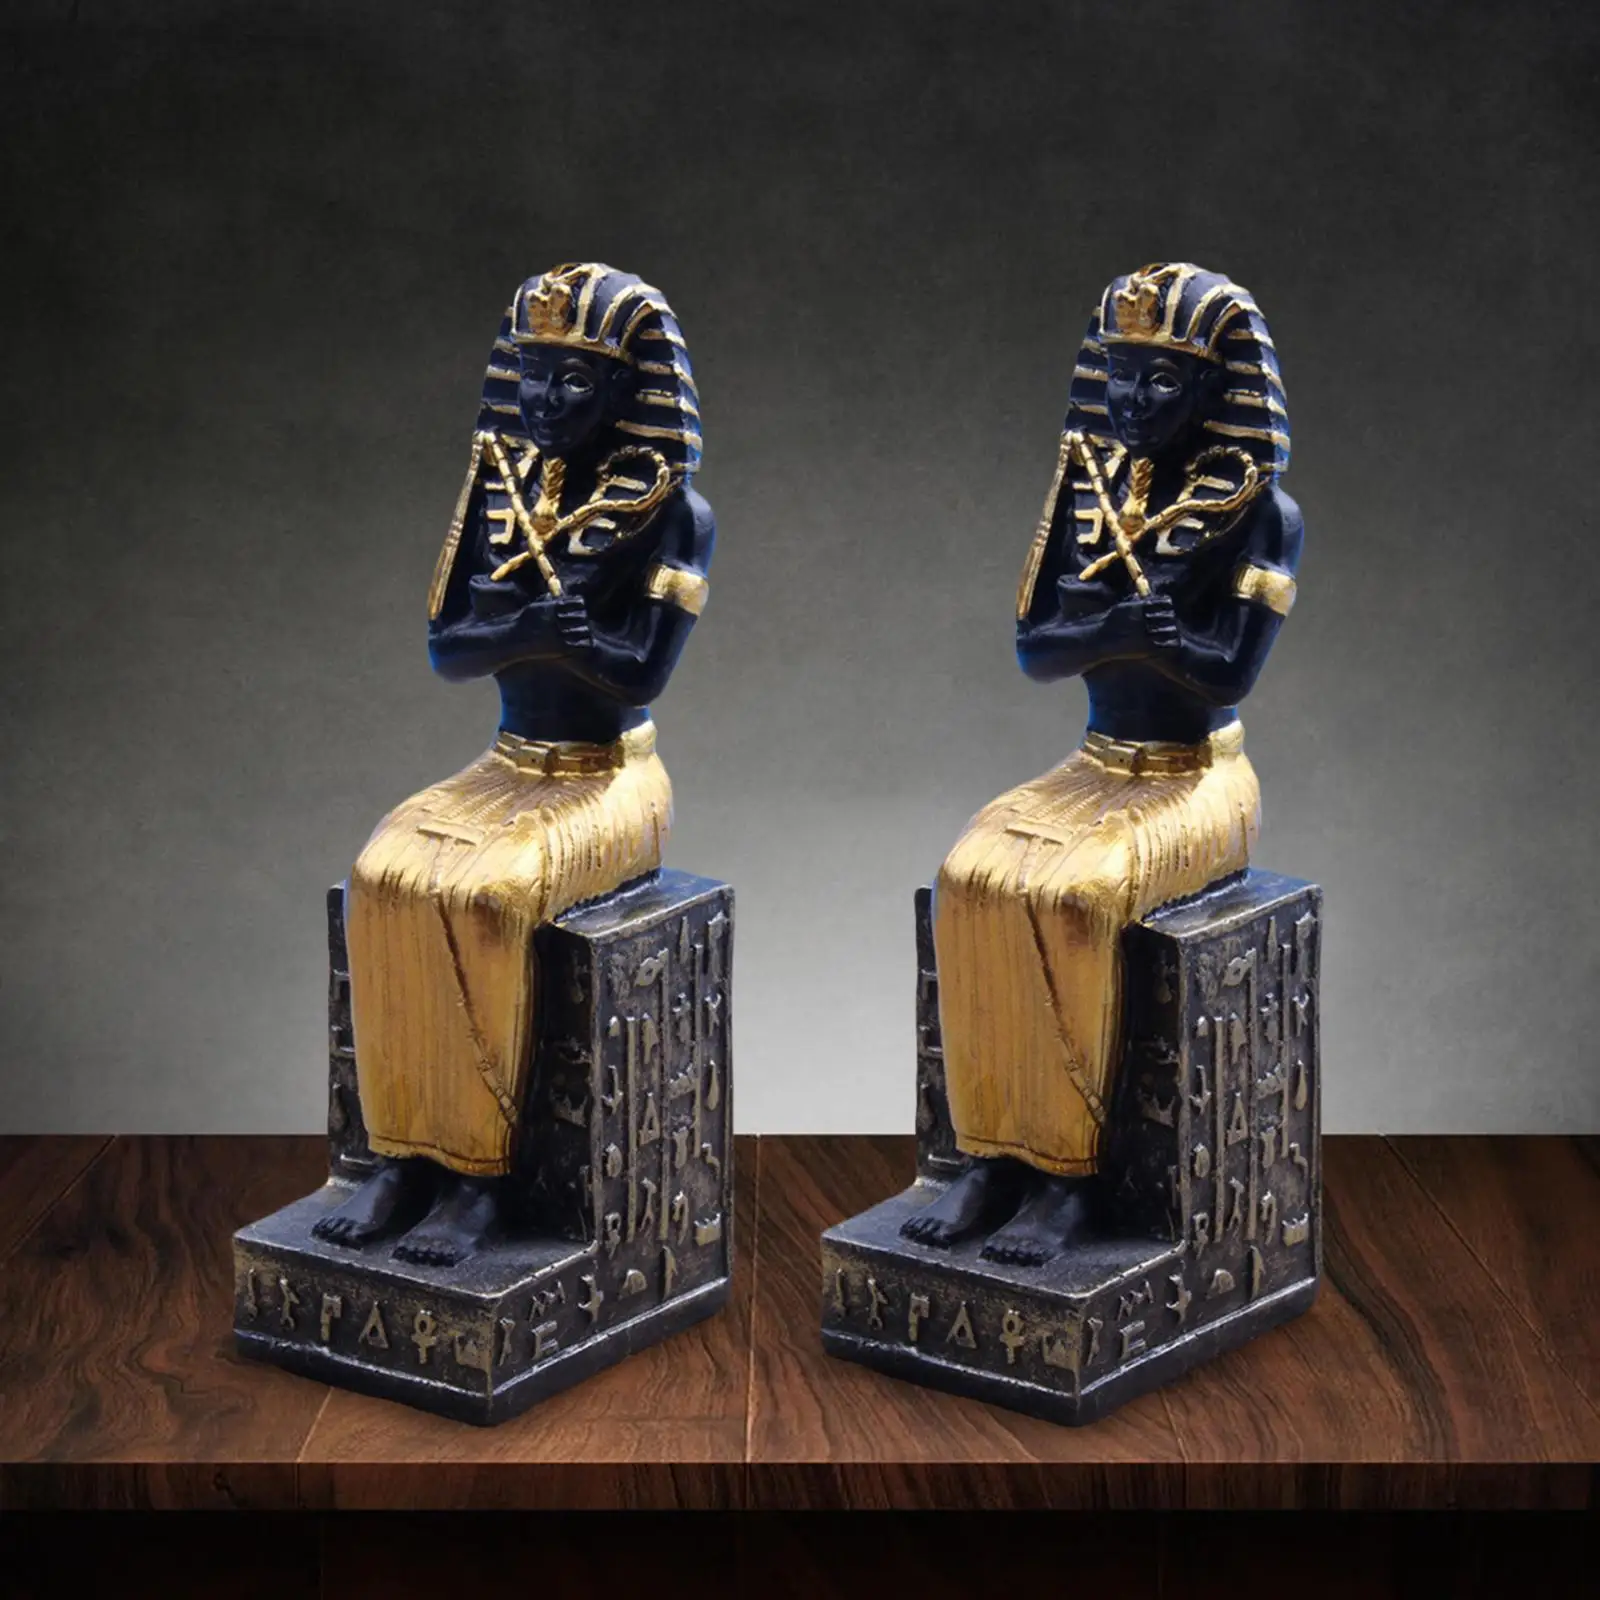 2x Ancient Egyptian Pharaoh Figurines Sculpture Collectible Artware for Home